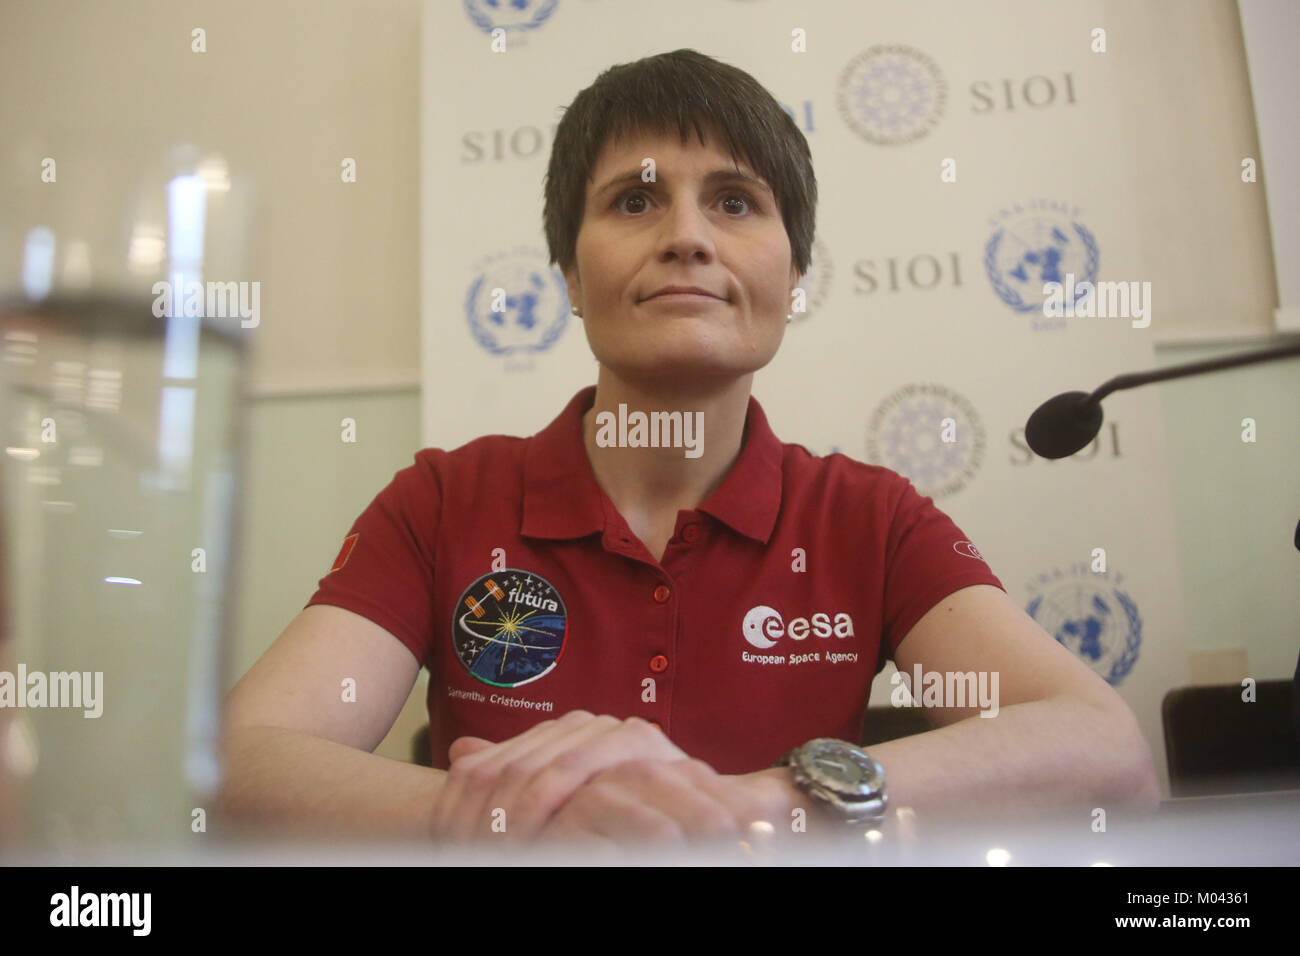 Rome, Italy. 18th Jan, 2018. 18.01.2017. Rome, Italy: the astronaut Samantha Cristoforetti, guest at the Sioi headquarters in Rome, at the conference for the presentation of the x edition of the Masters in institutions and space poles 'traveling among the stars: from the Moon to Mars'. Credit: Independent Photo Agency/Alamy Live News Stock Photo